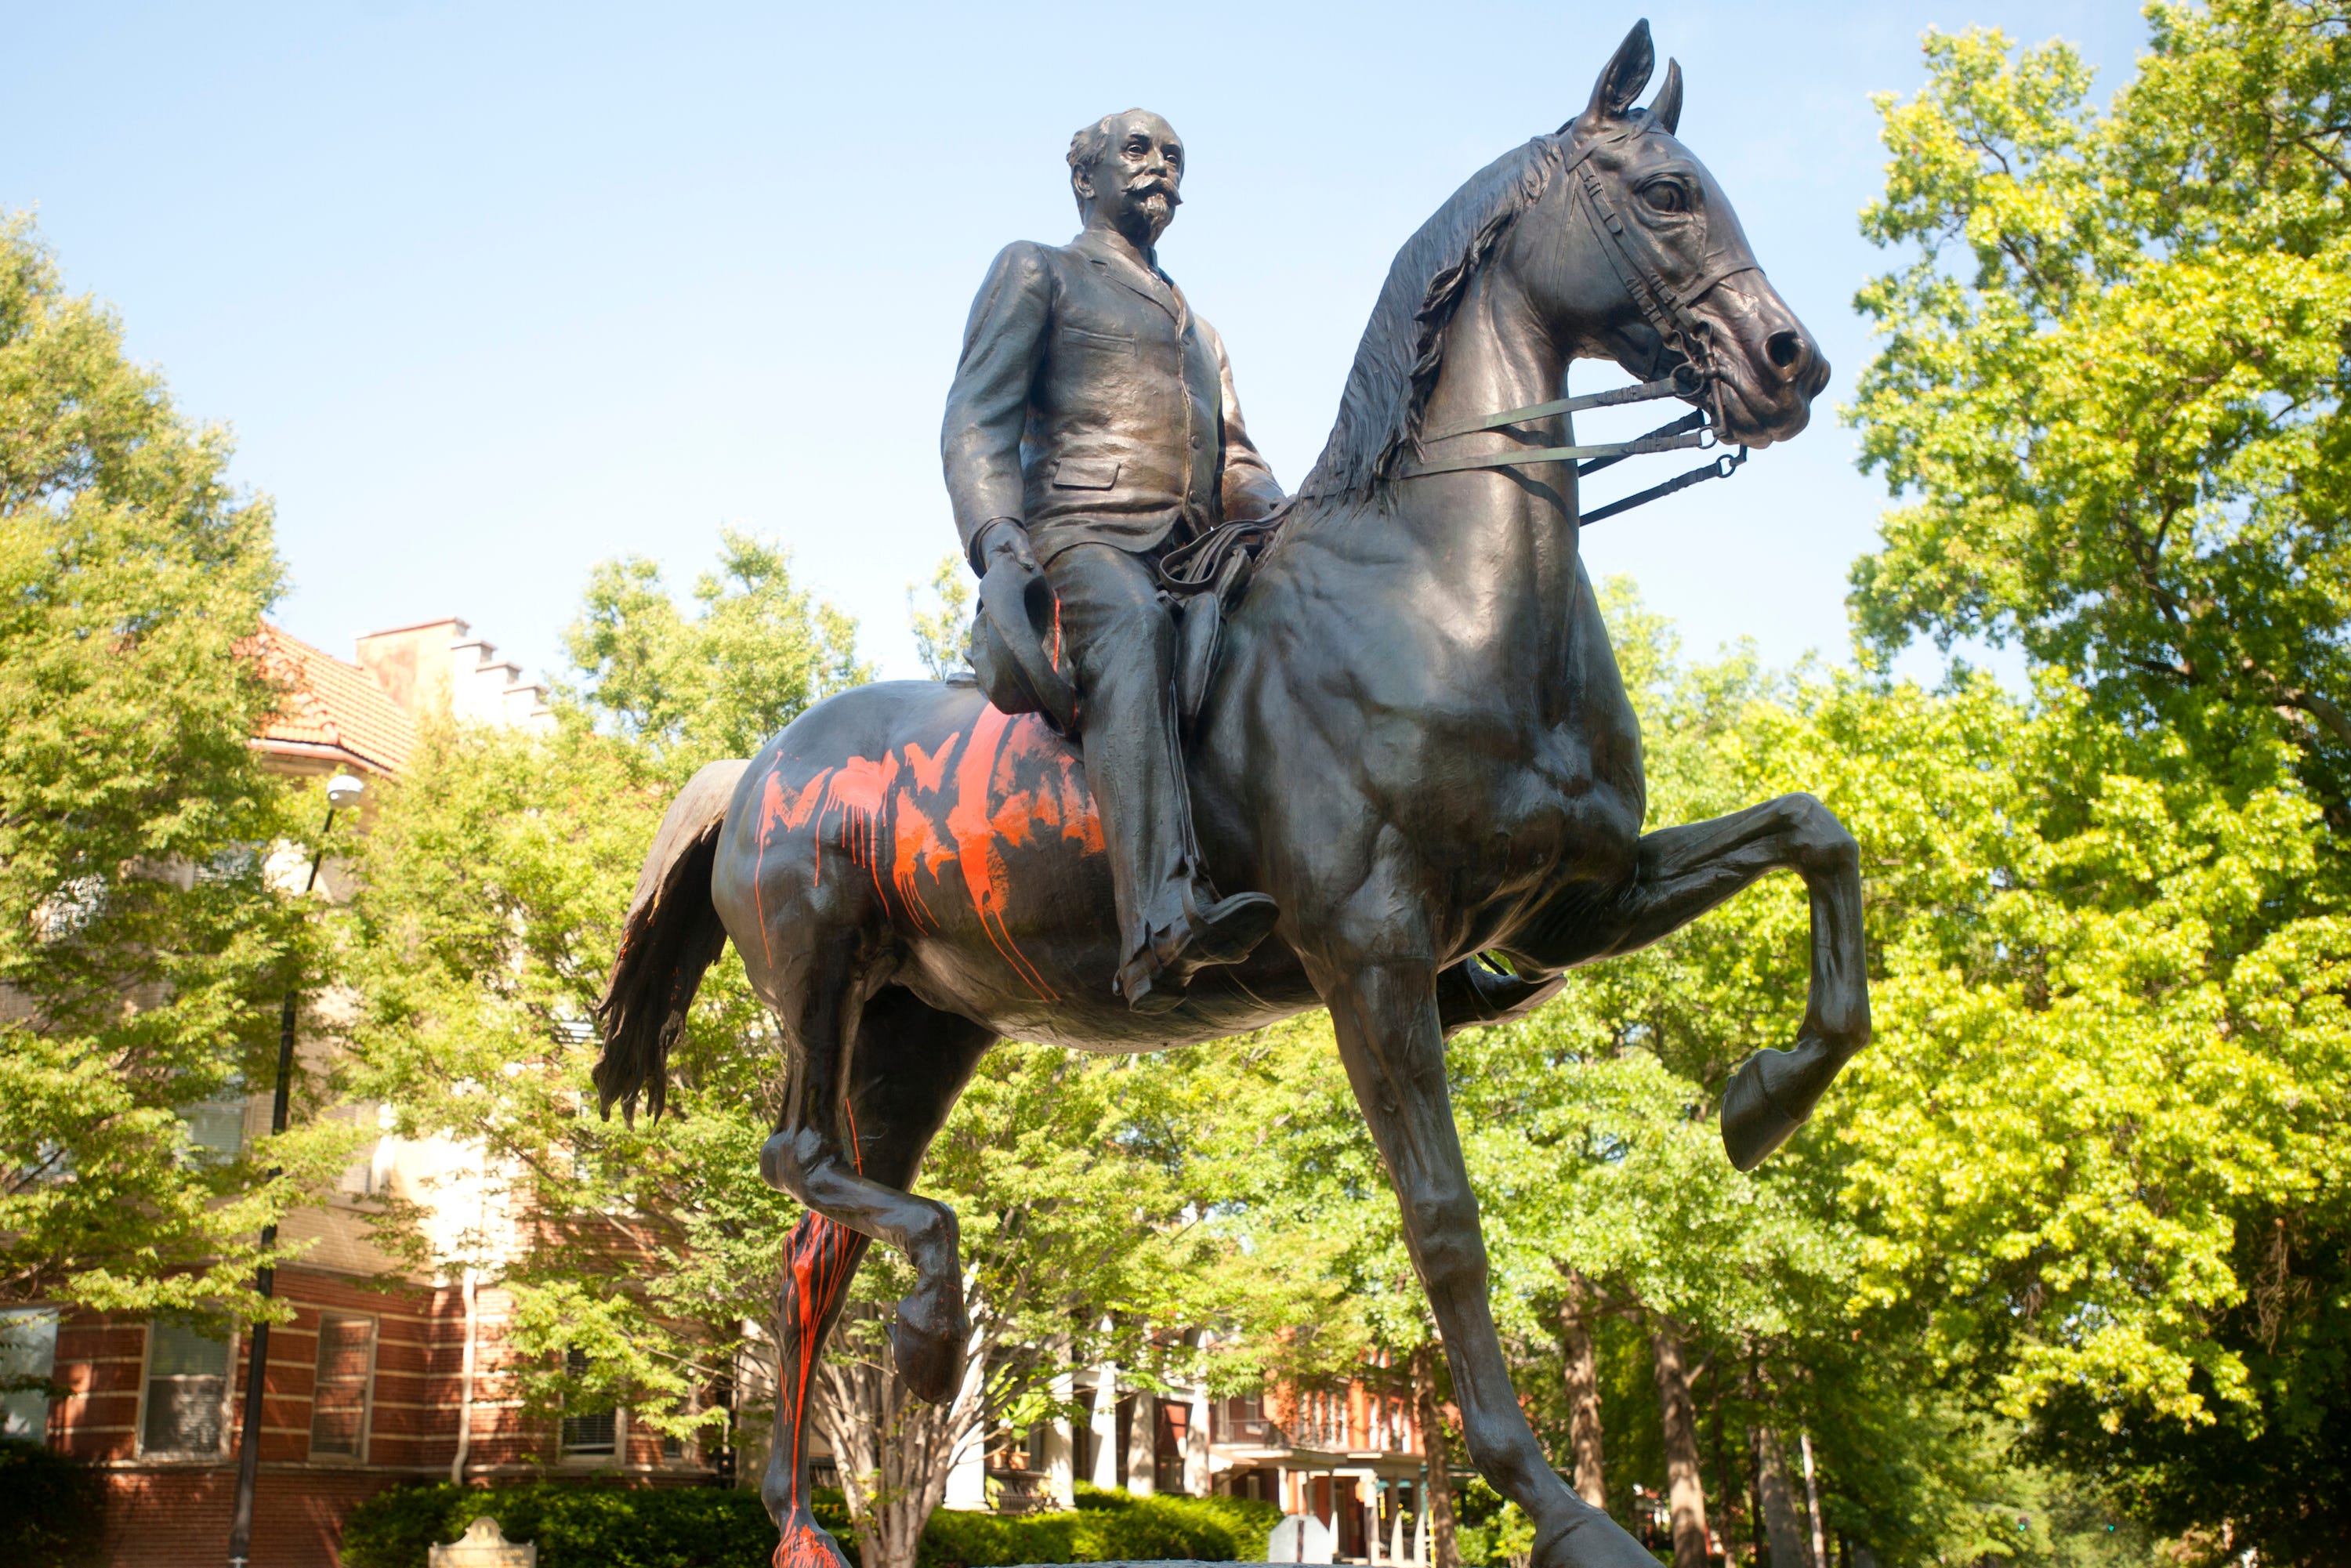 The John Breckinridge Castleman statue and historical marker in the Cherokee Triangle neighborhood was covered in orange paint. The paint was discovered early Sunday morning, a day after violence erupted in Charlottesville, Virginia, following a white supremacist rally. Castleman was a major in the Confederate Army. In the Spanish American war, he was commissioned a colonel by the U.S. Army and after his retirement, he was named a brigadier general. 
Aug. 13, 2017